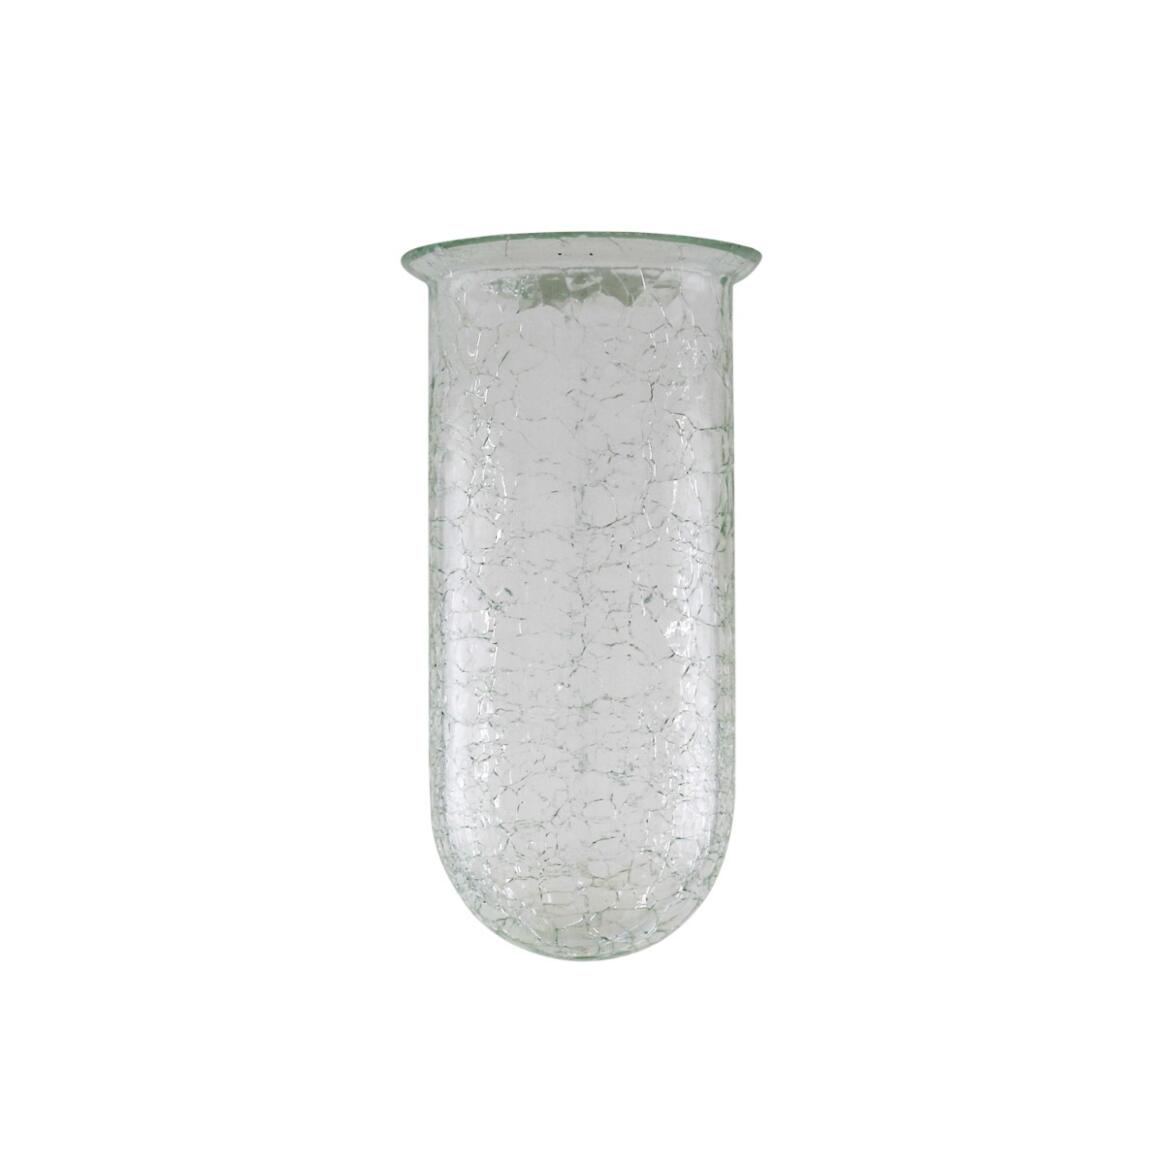 Crackled well glass lamp shade main product image